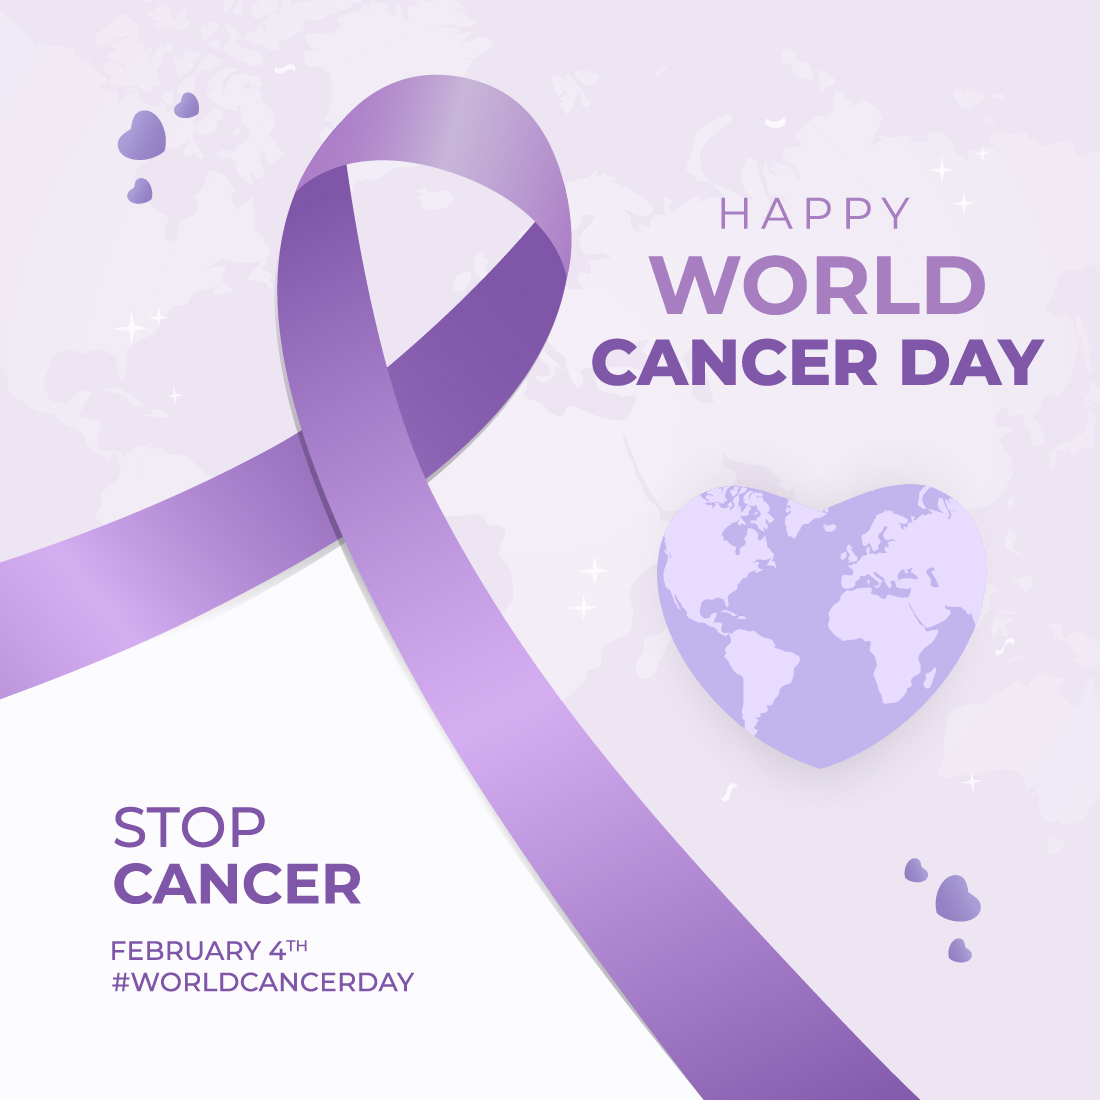 Happy World Cancer Day February 4th Illustrations  cover.